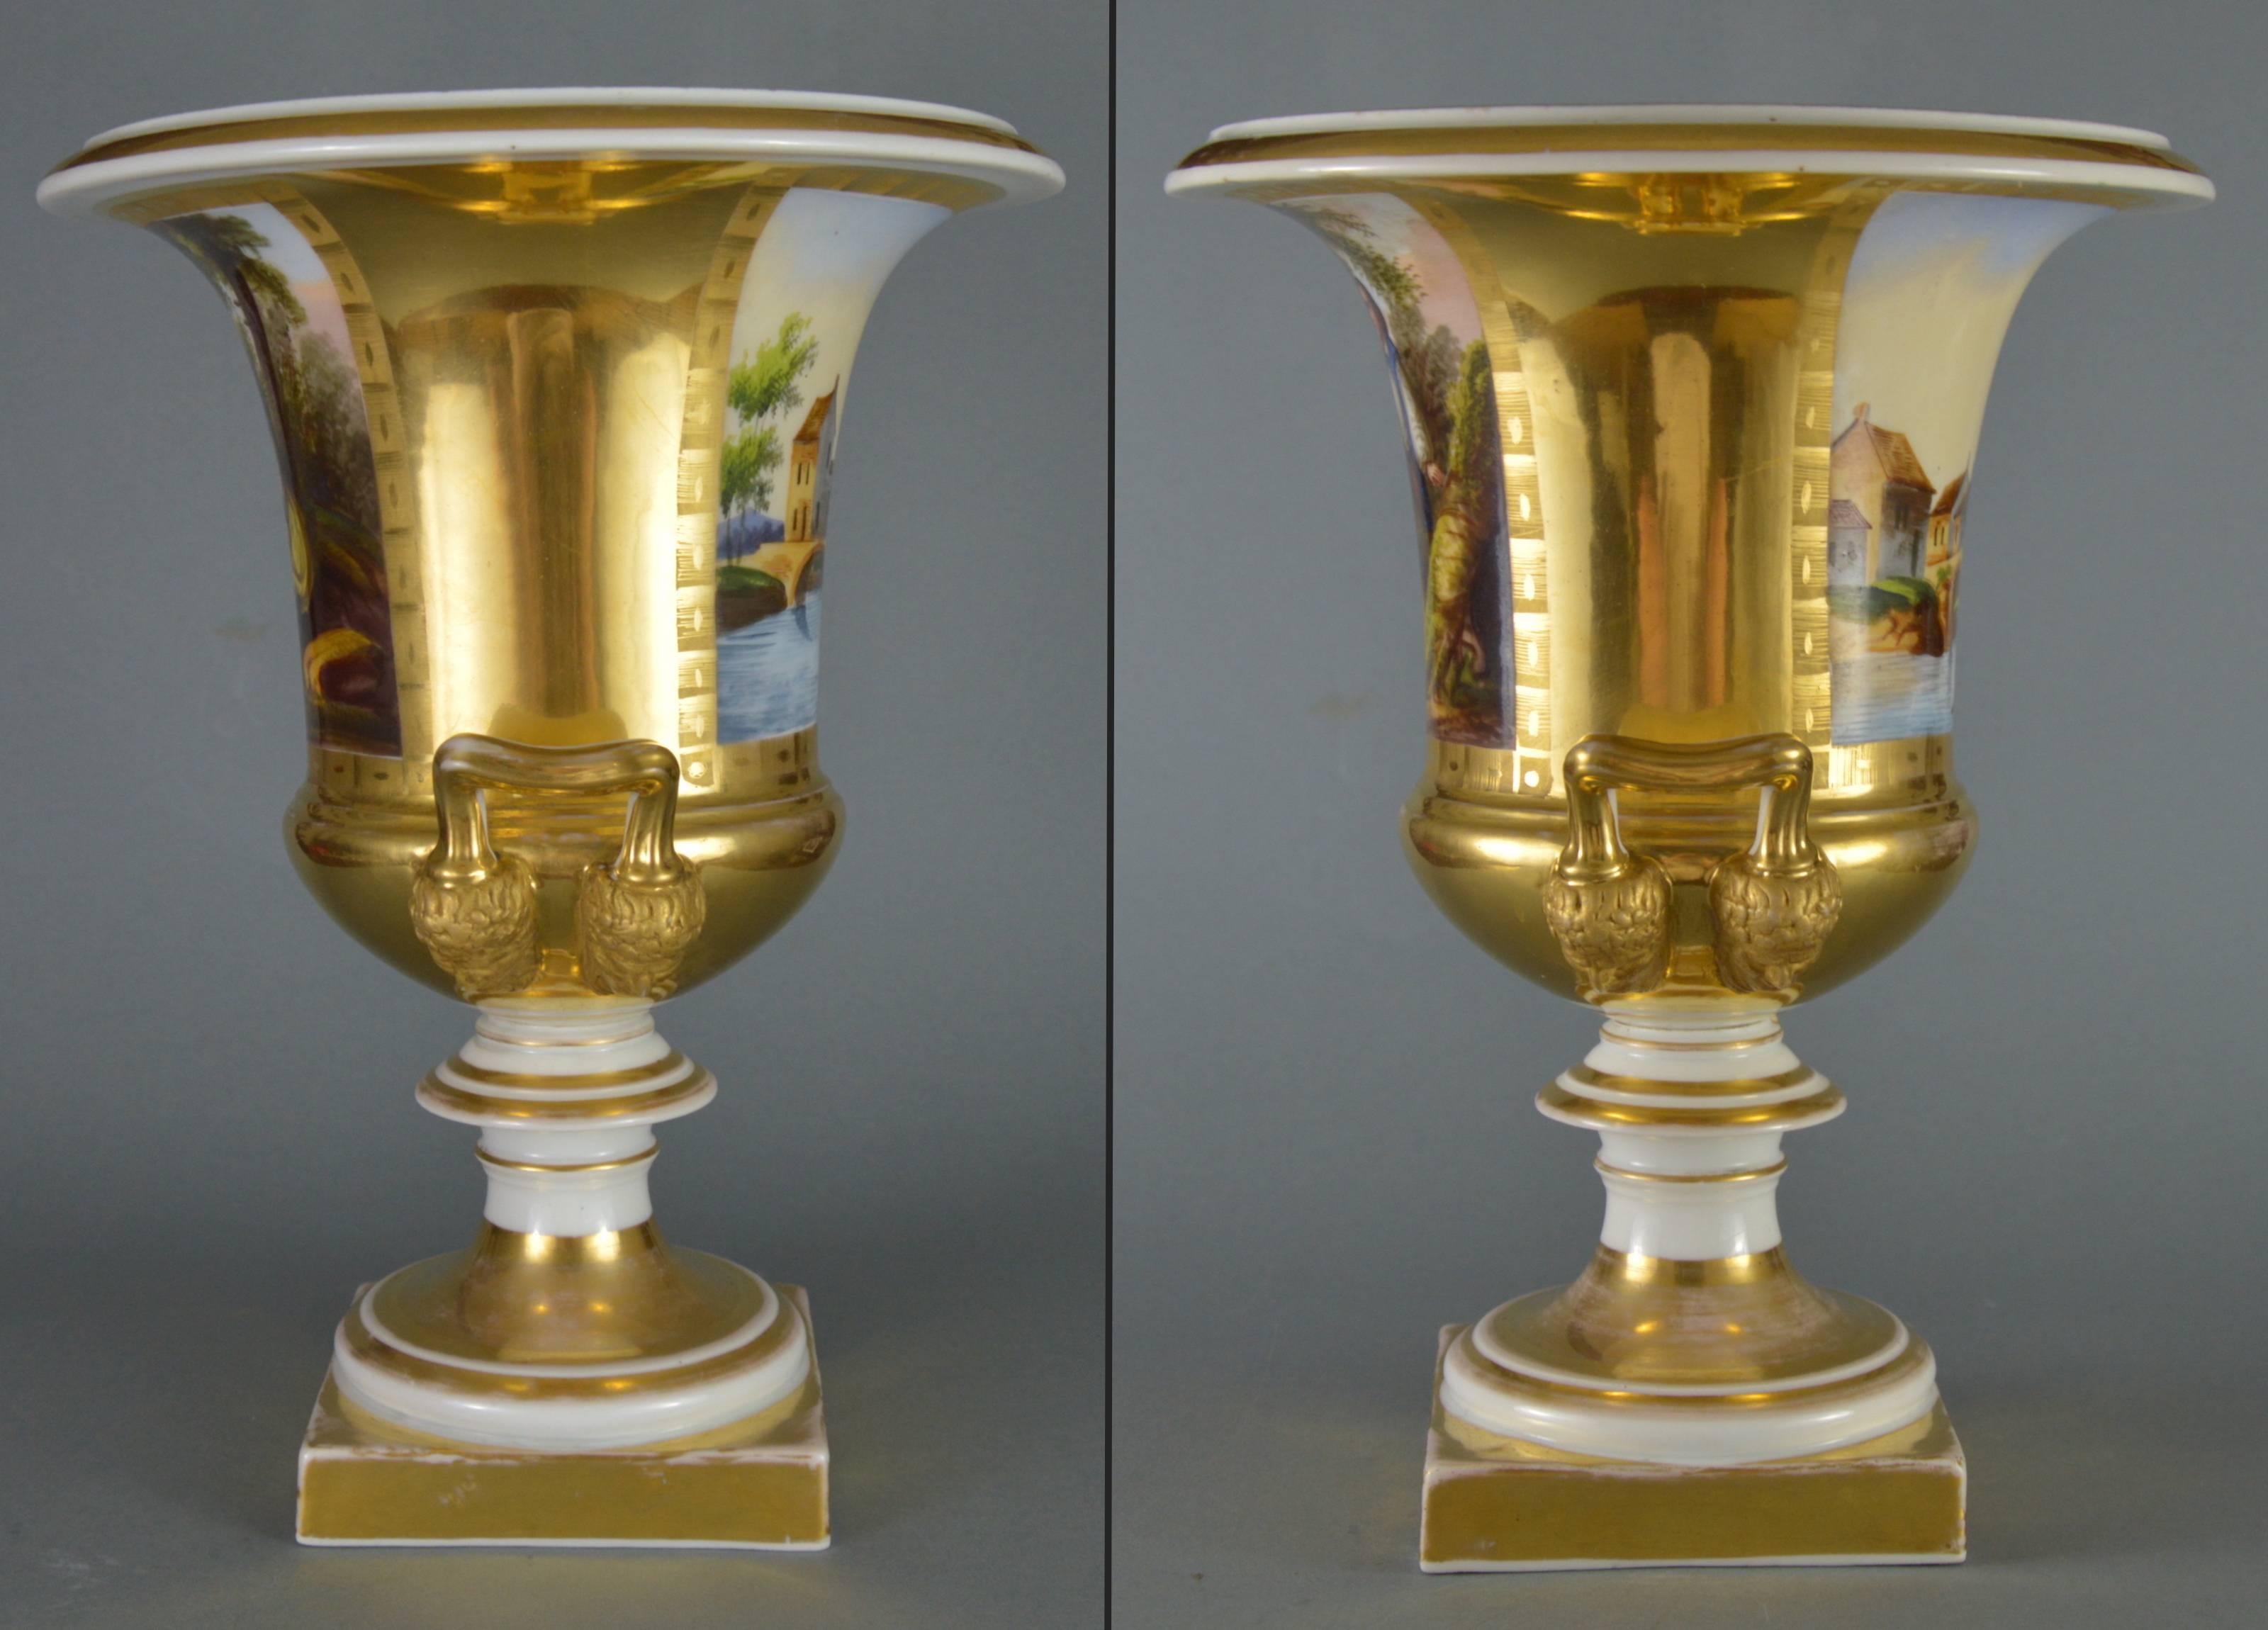 Pair of French Empire porcelain medici vases. The main face of each vase is decorated by gorgeous romantic scenes, the other side with landscapes. Created in a period between 1820-1840.
Measures: Height: 31.5 cm, Ø – 23.5 cm.

Condition report: